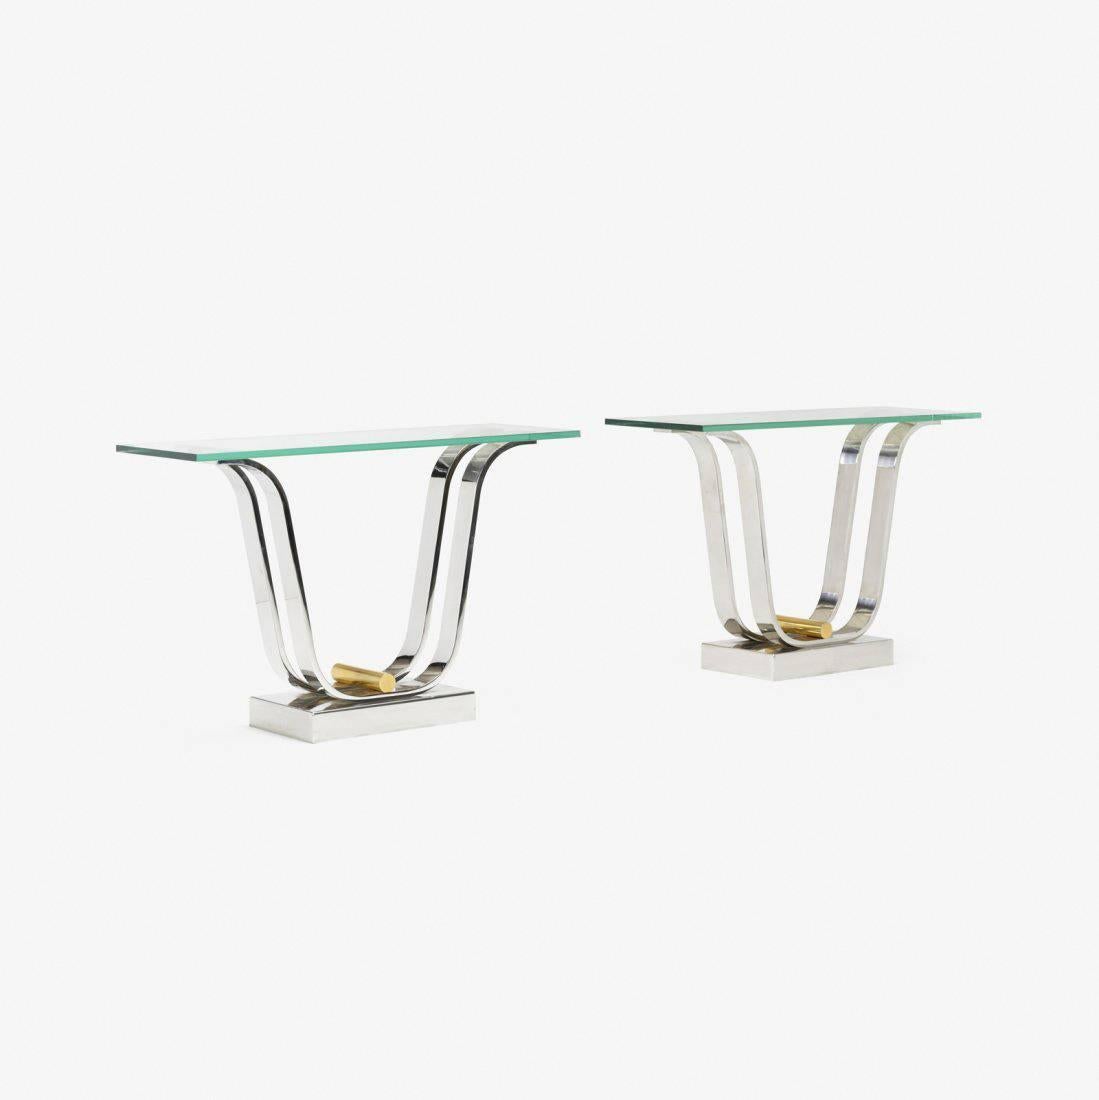 Pair of authenticated tulip table bases designed and manufactured by Karl Springer, Ltd. The bases are currently configured as a pair of console tables with glass tops, but they can also be used as dining table bases to support a large glass top.